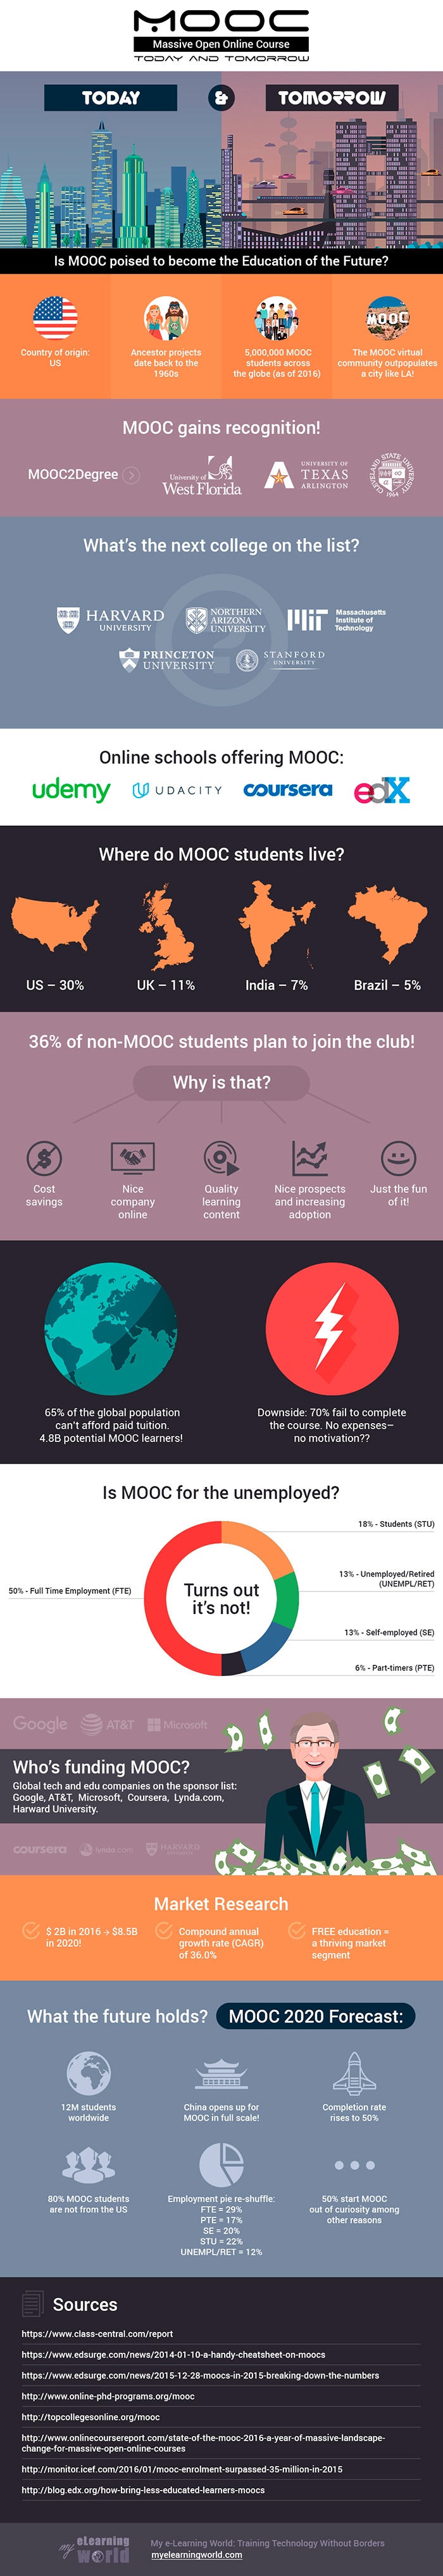 MOOC: Today and Tomorrow Infographic